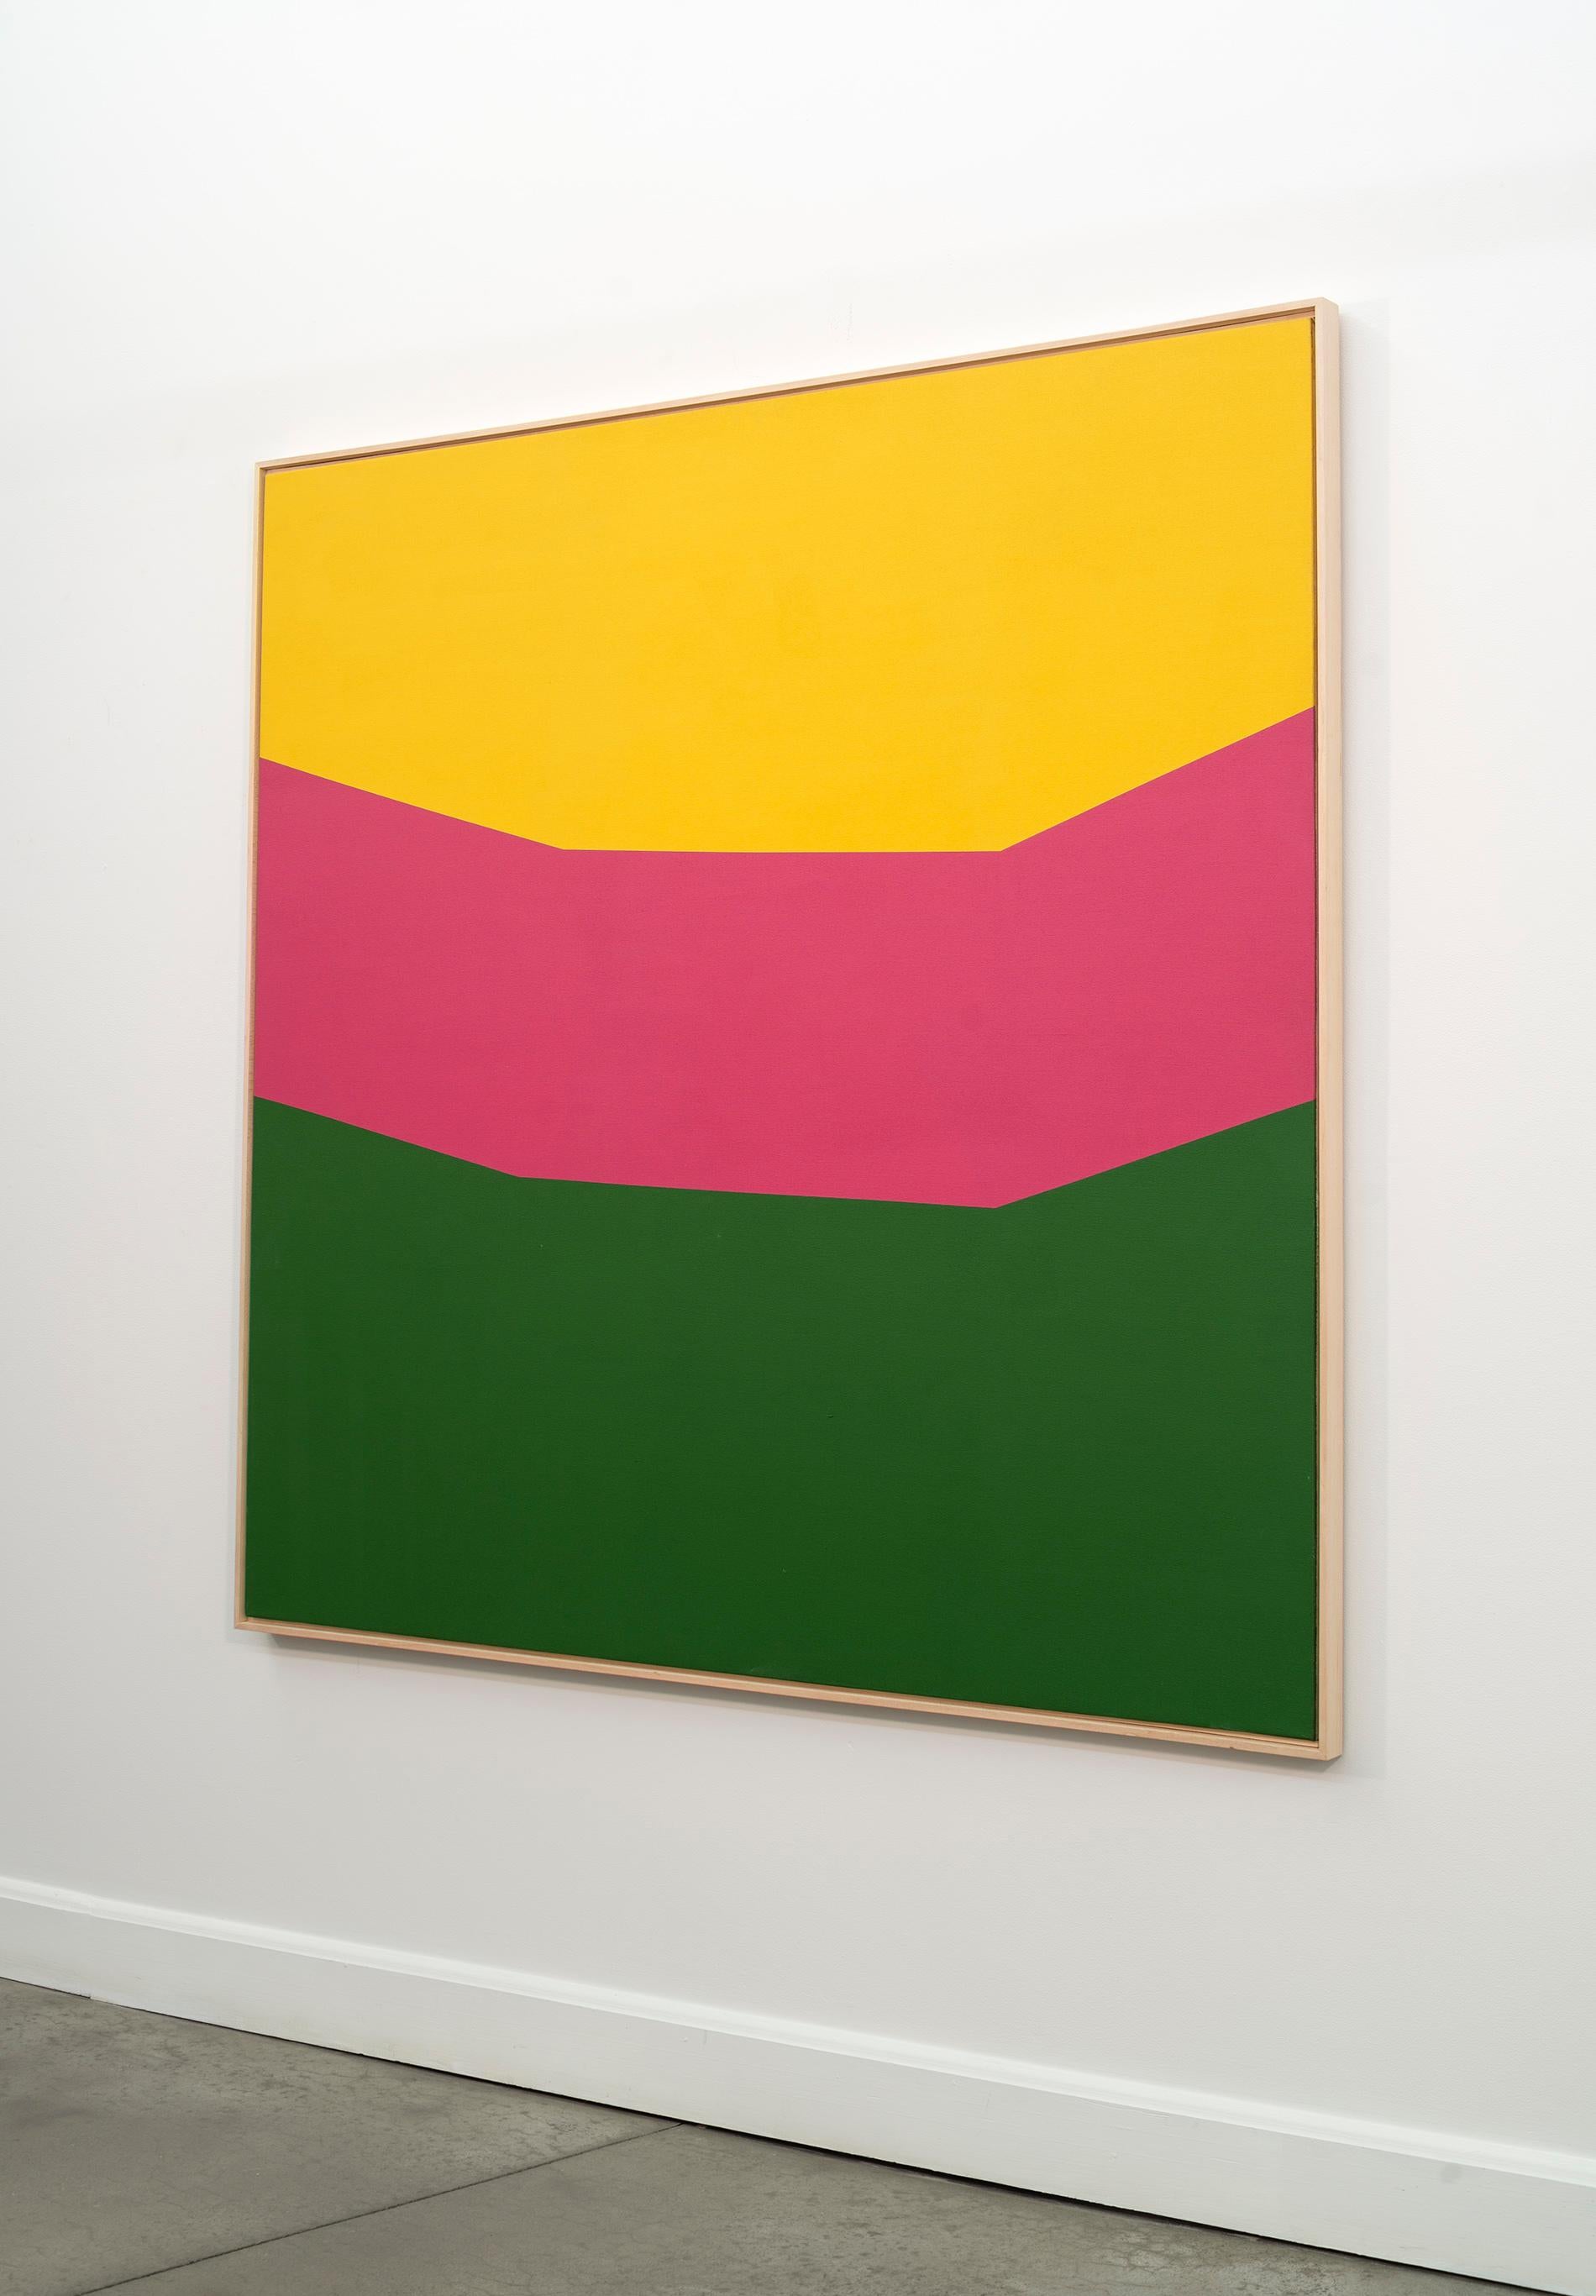 Colour Form 18 - large, yellow, green, pink, minimal abstract, acrylic on canvas - Painting by Milly Ristvedt